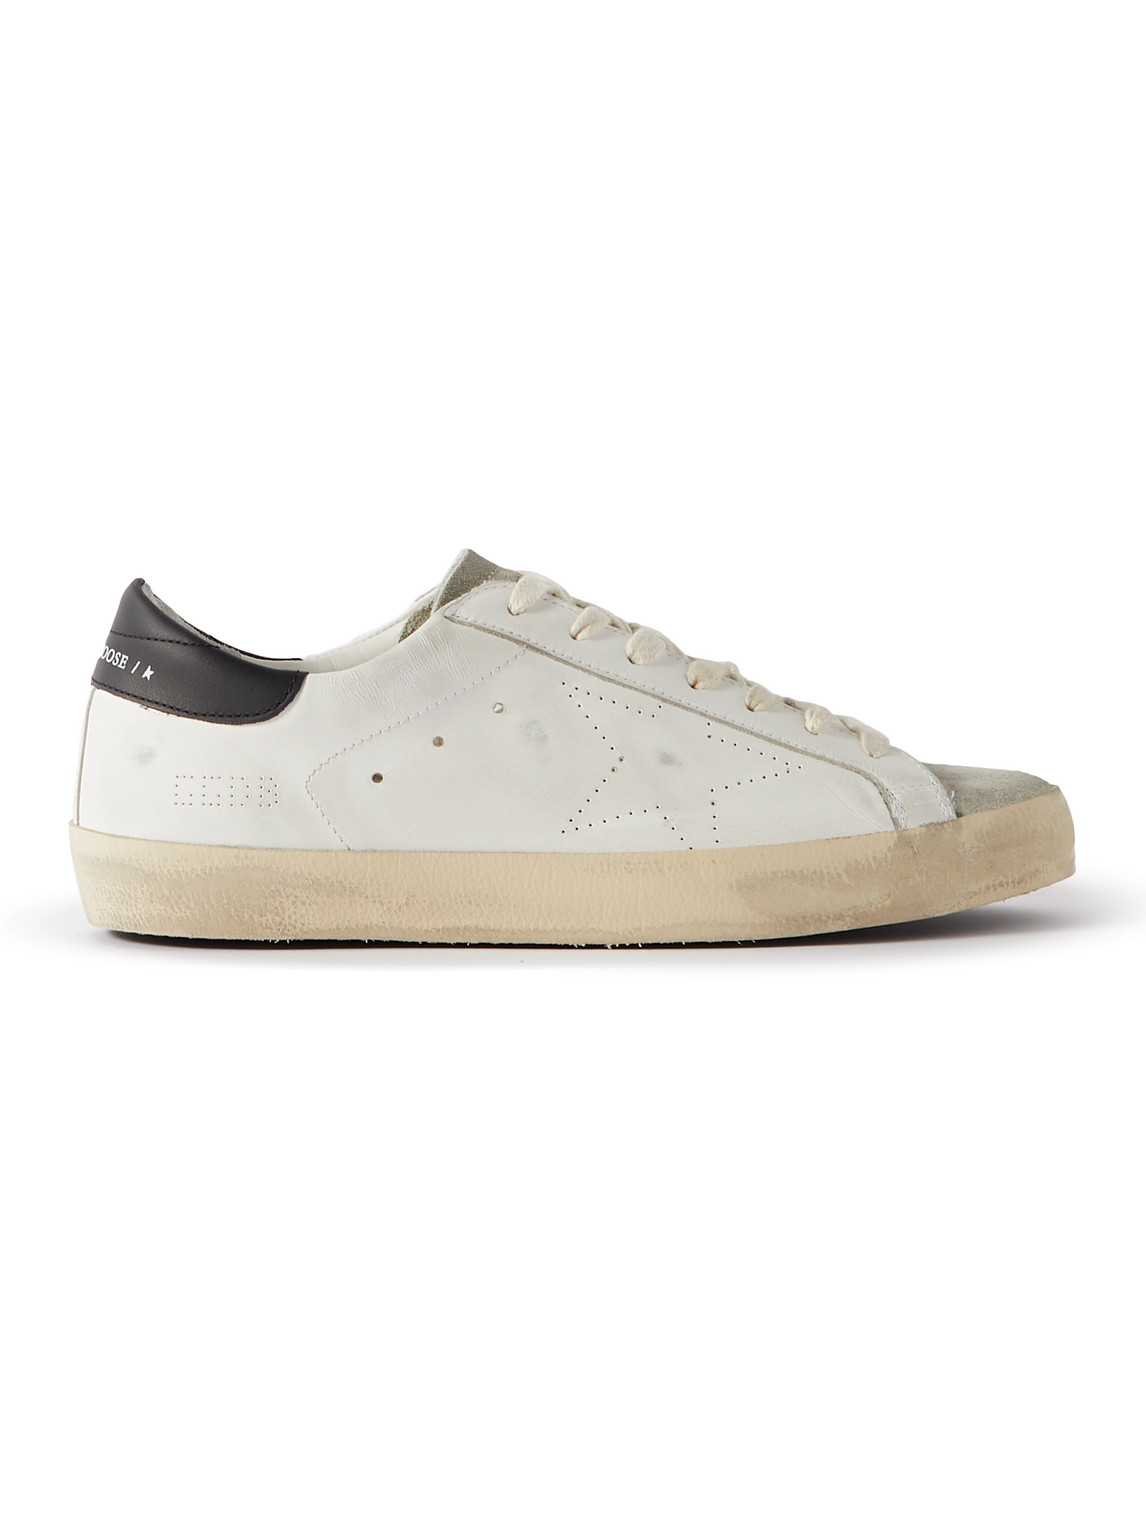 Golden Goose Superstar Distressed Leather And Suede Sneakers In White |  ModeSens